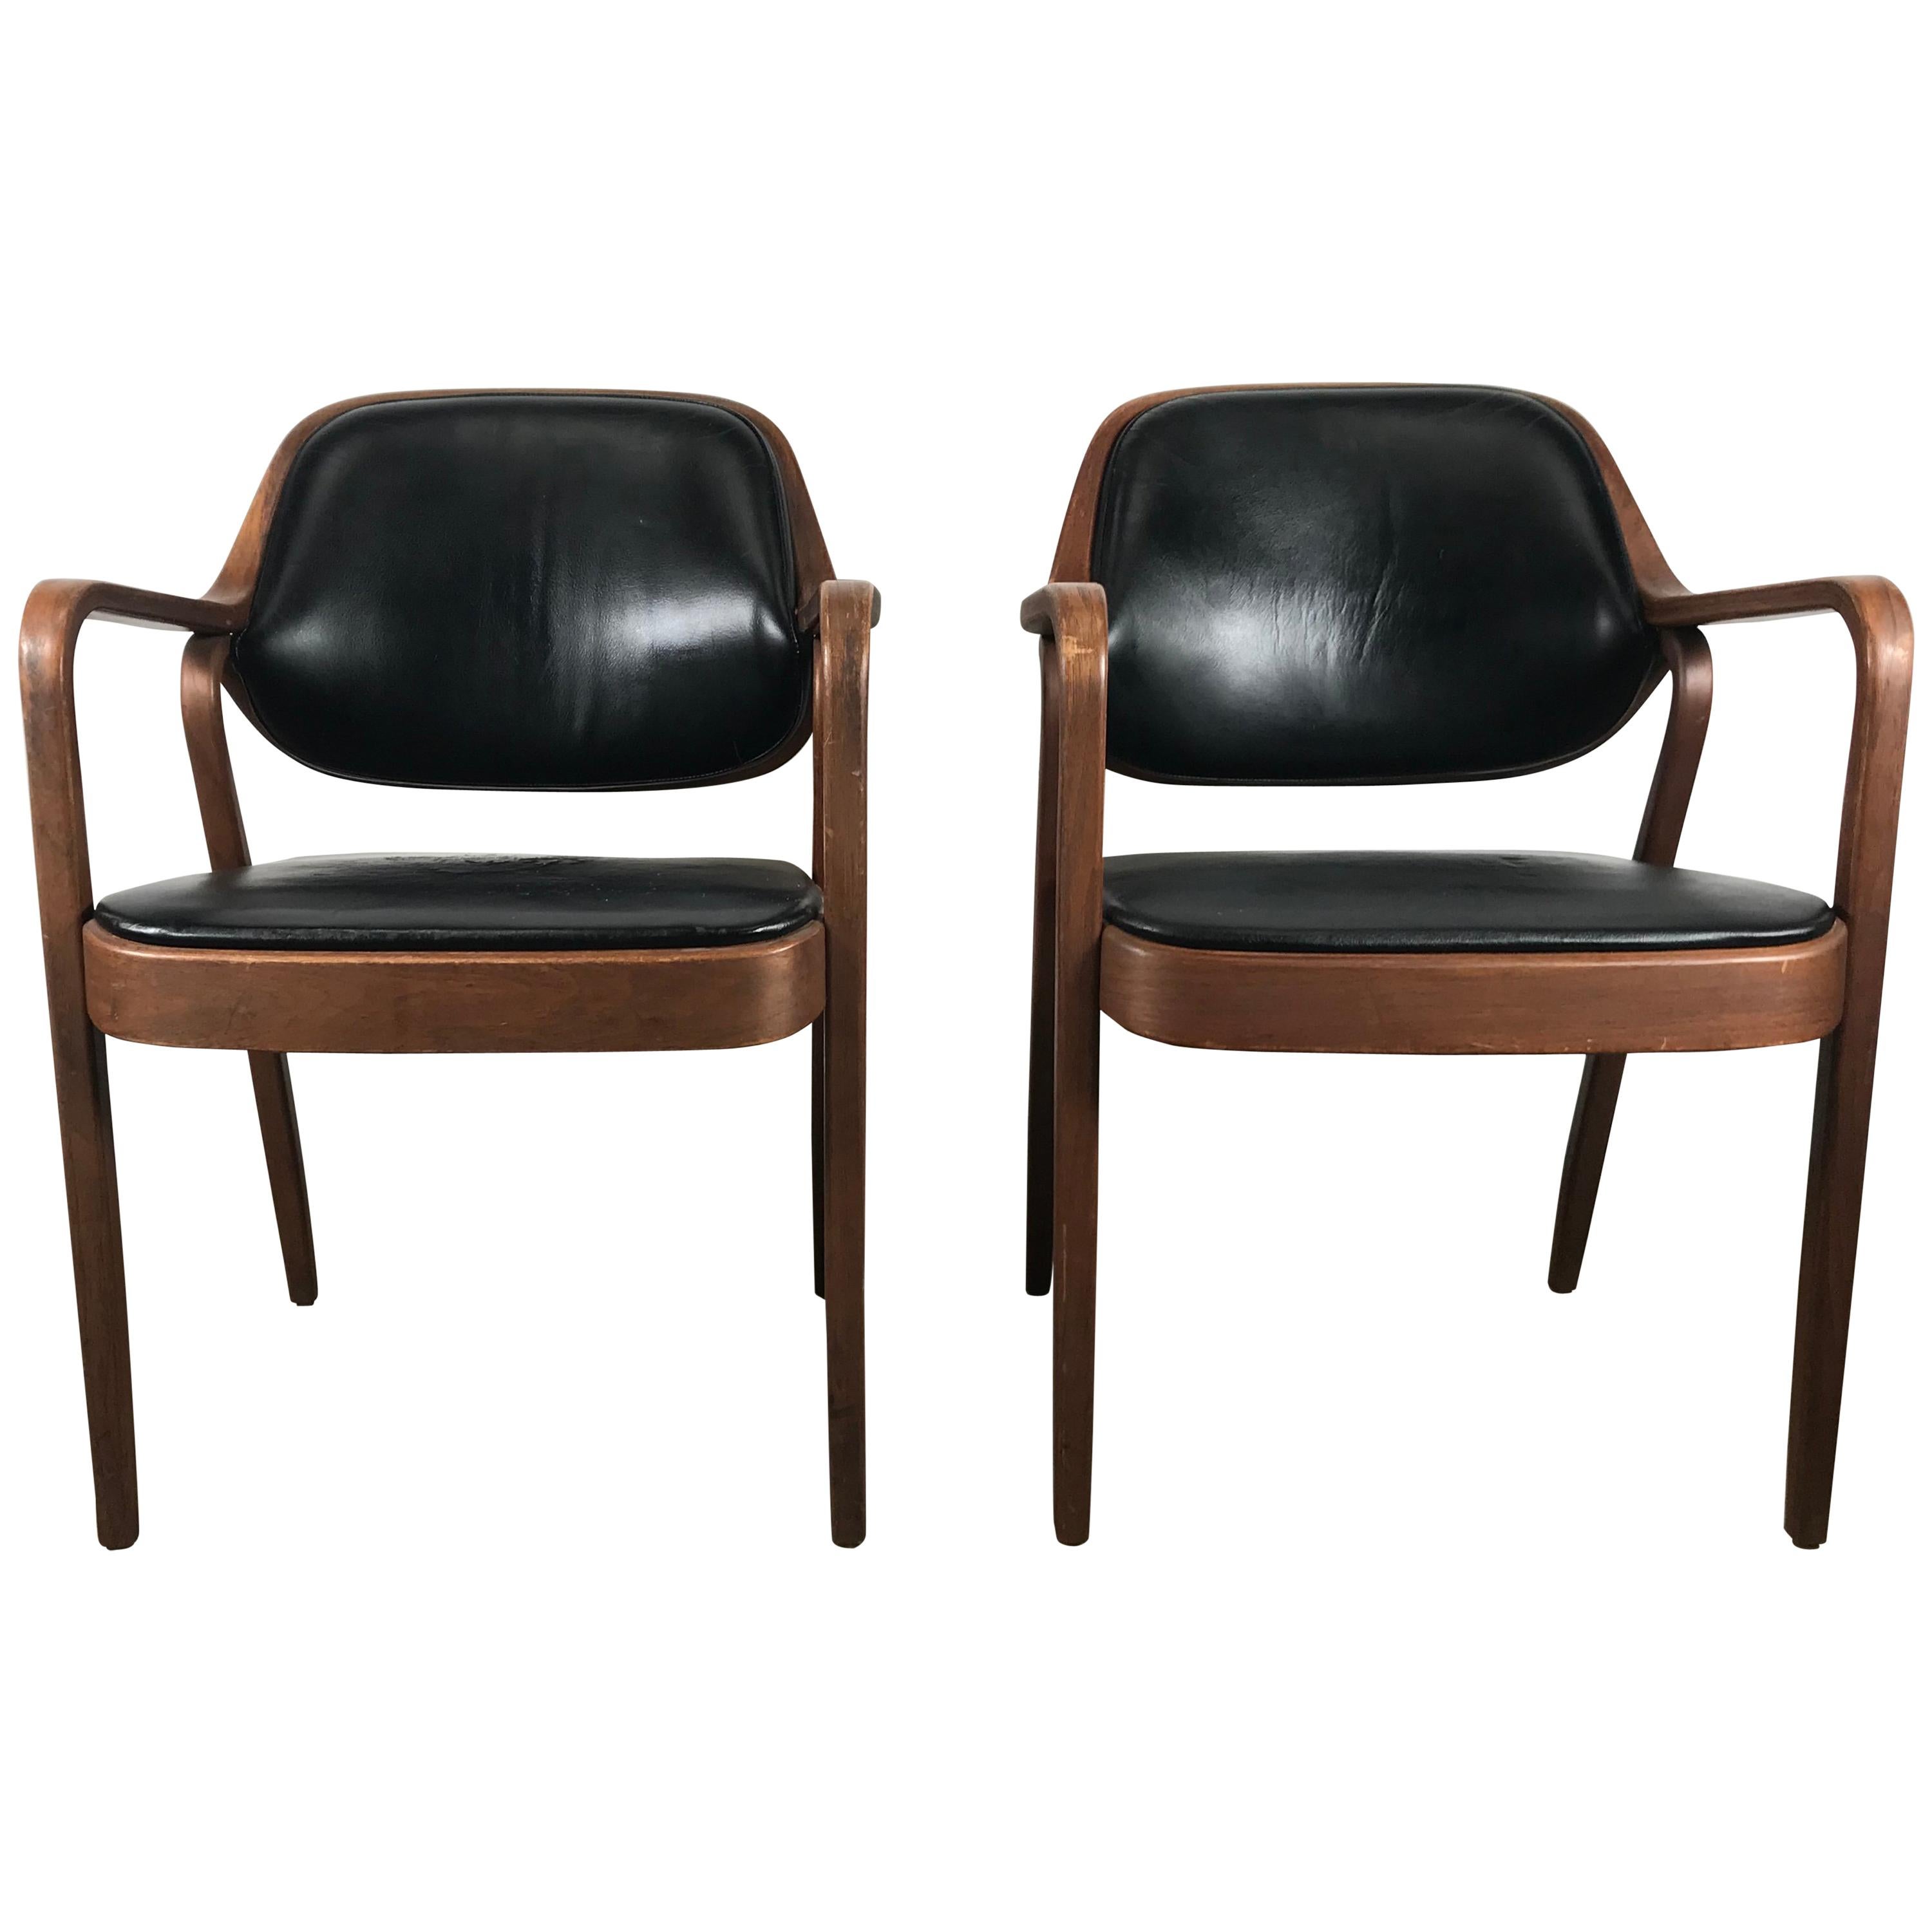 Pair of Modernist Bentwood Mahogany and Leather Chairs by Don Pettit for Knoll